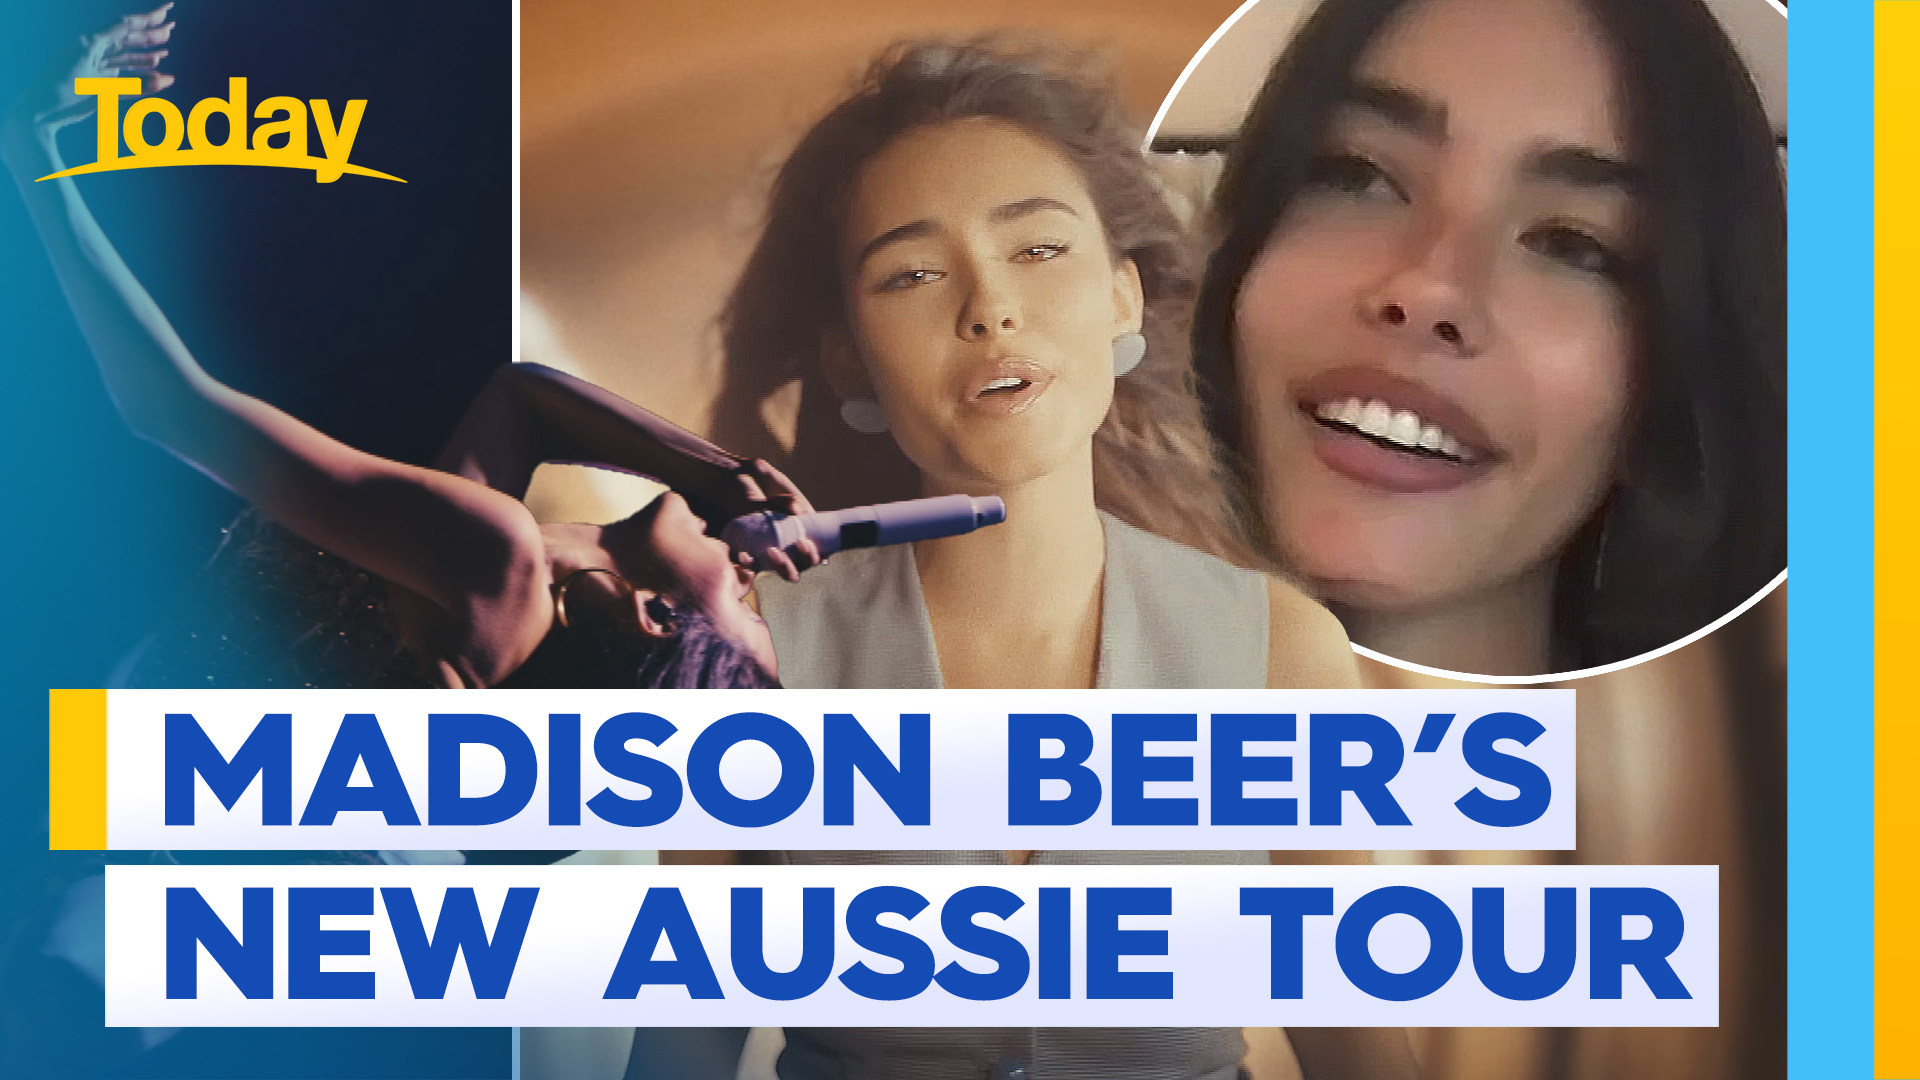 Madison Beer catches up with Today